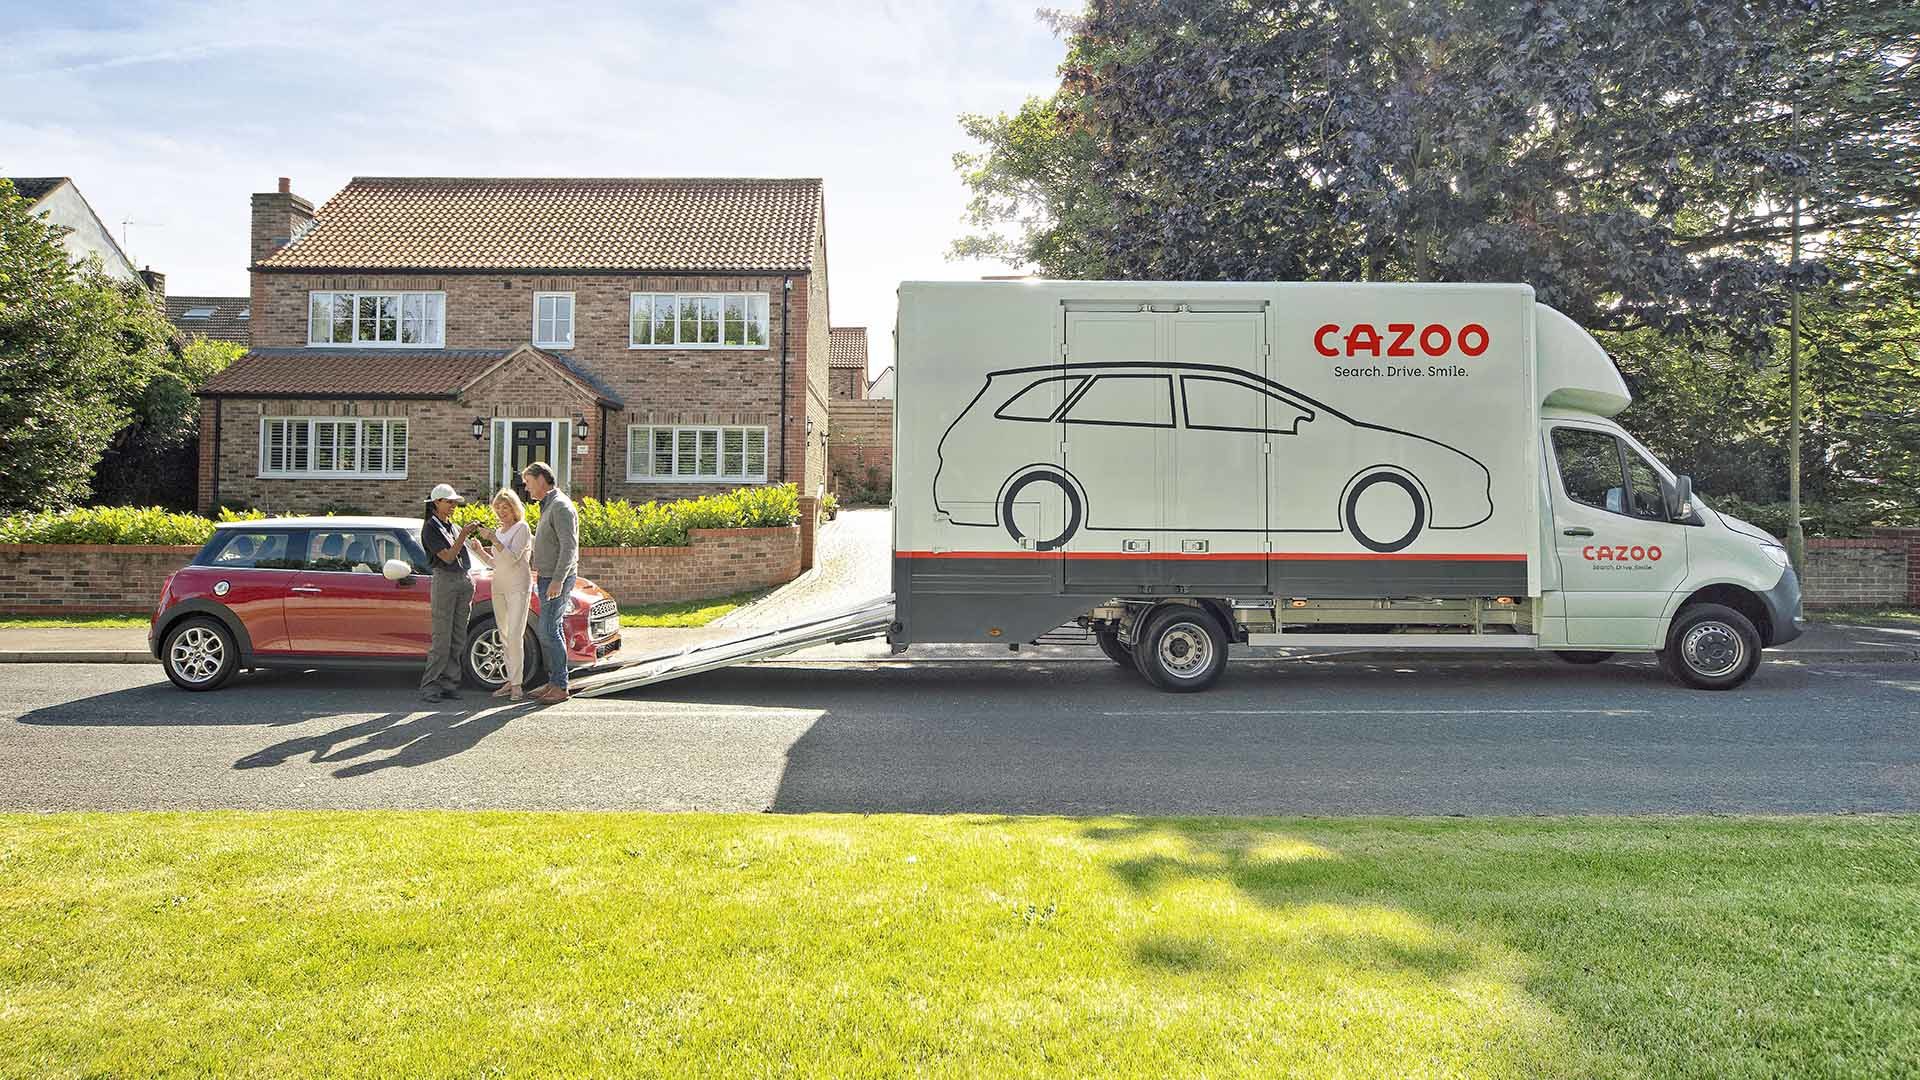 A Cazoo delivery